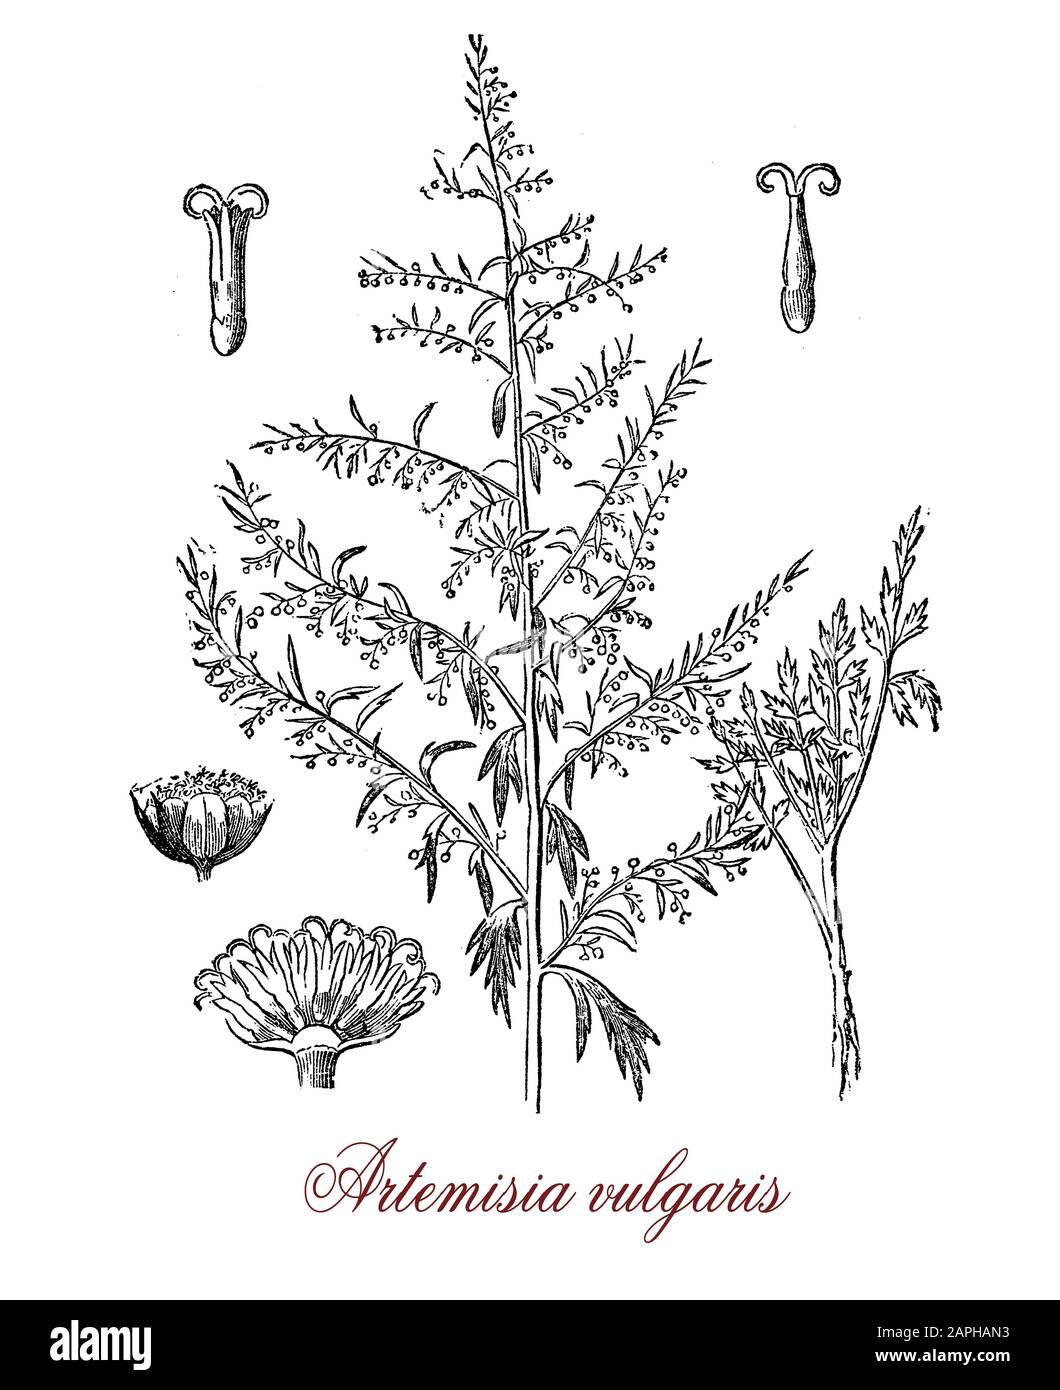 Artemisia vulgaris or common mugwort invasive weed with small florets used as medicinally and  culinary herb: flavoring and bittering ales, for pain relief, treatment of fever and as diuretic Stock Photo